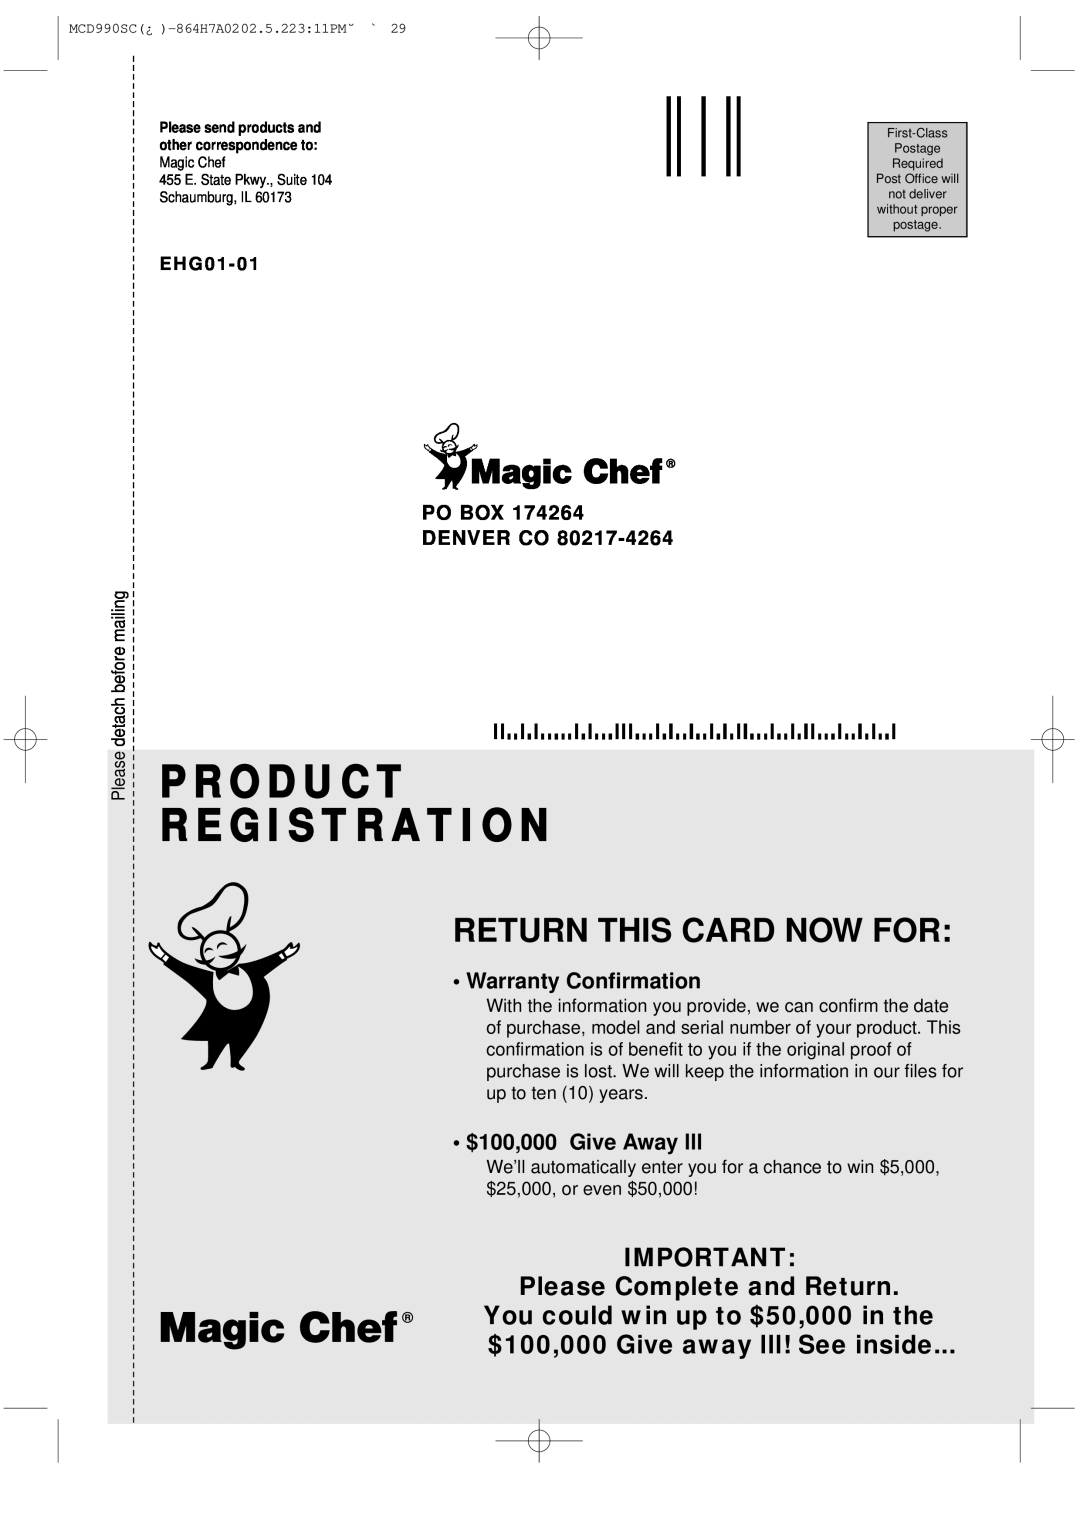 Magic Chef MCD990SC Please Complete and Return, Warranty Confirmation, $100,000 Give Away lll, Po Box Denver Co 